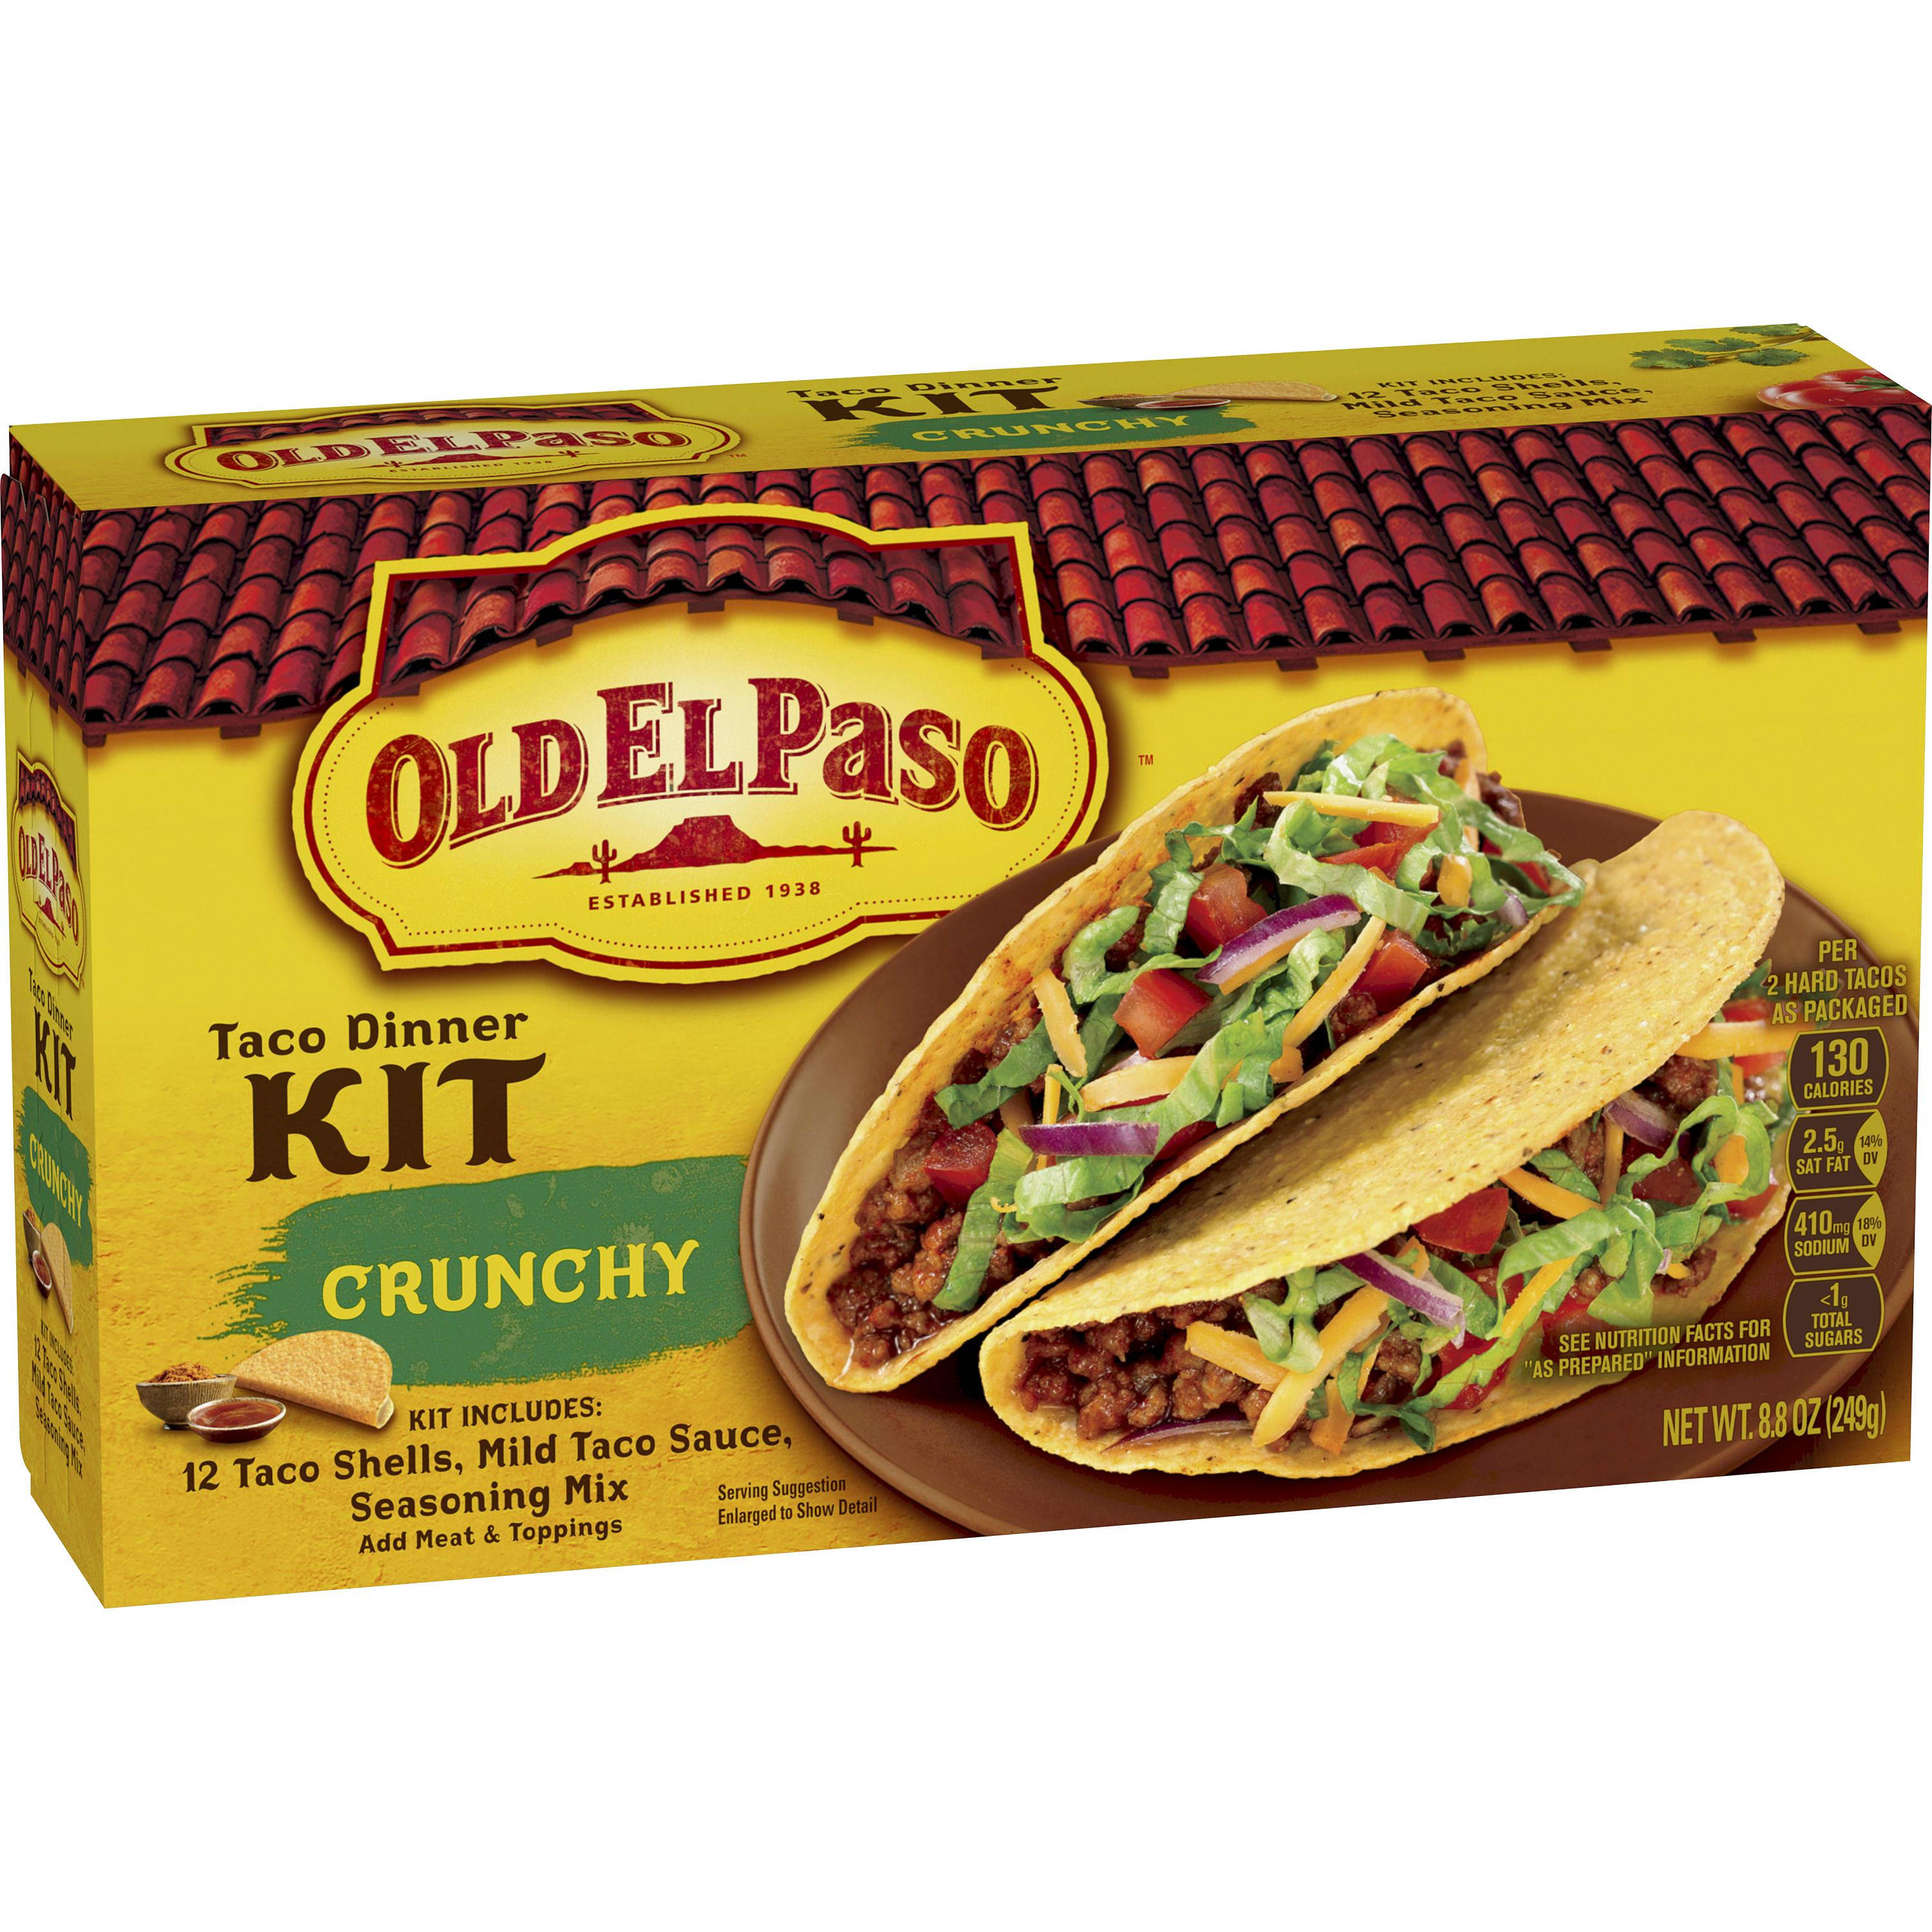 Old El Paso has declared May the 'Month of Mexican' and we're